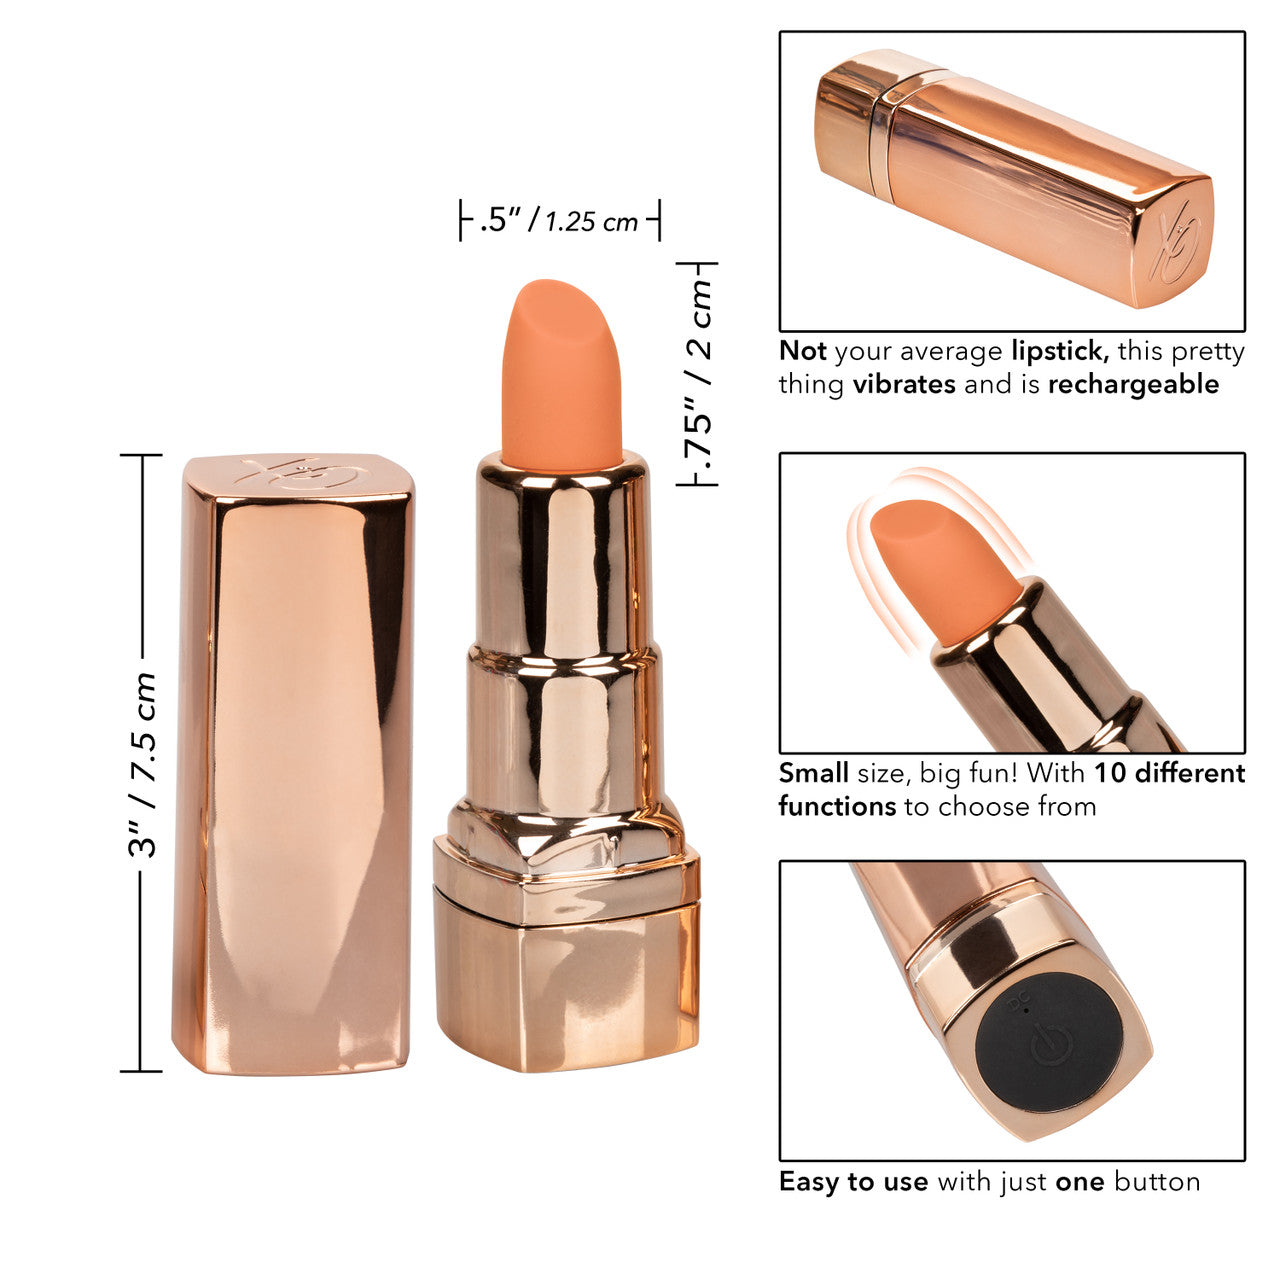 Hide & Play Rechargeable Lipstick - Coral